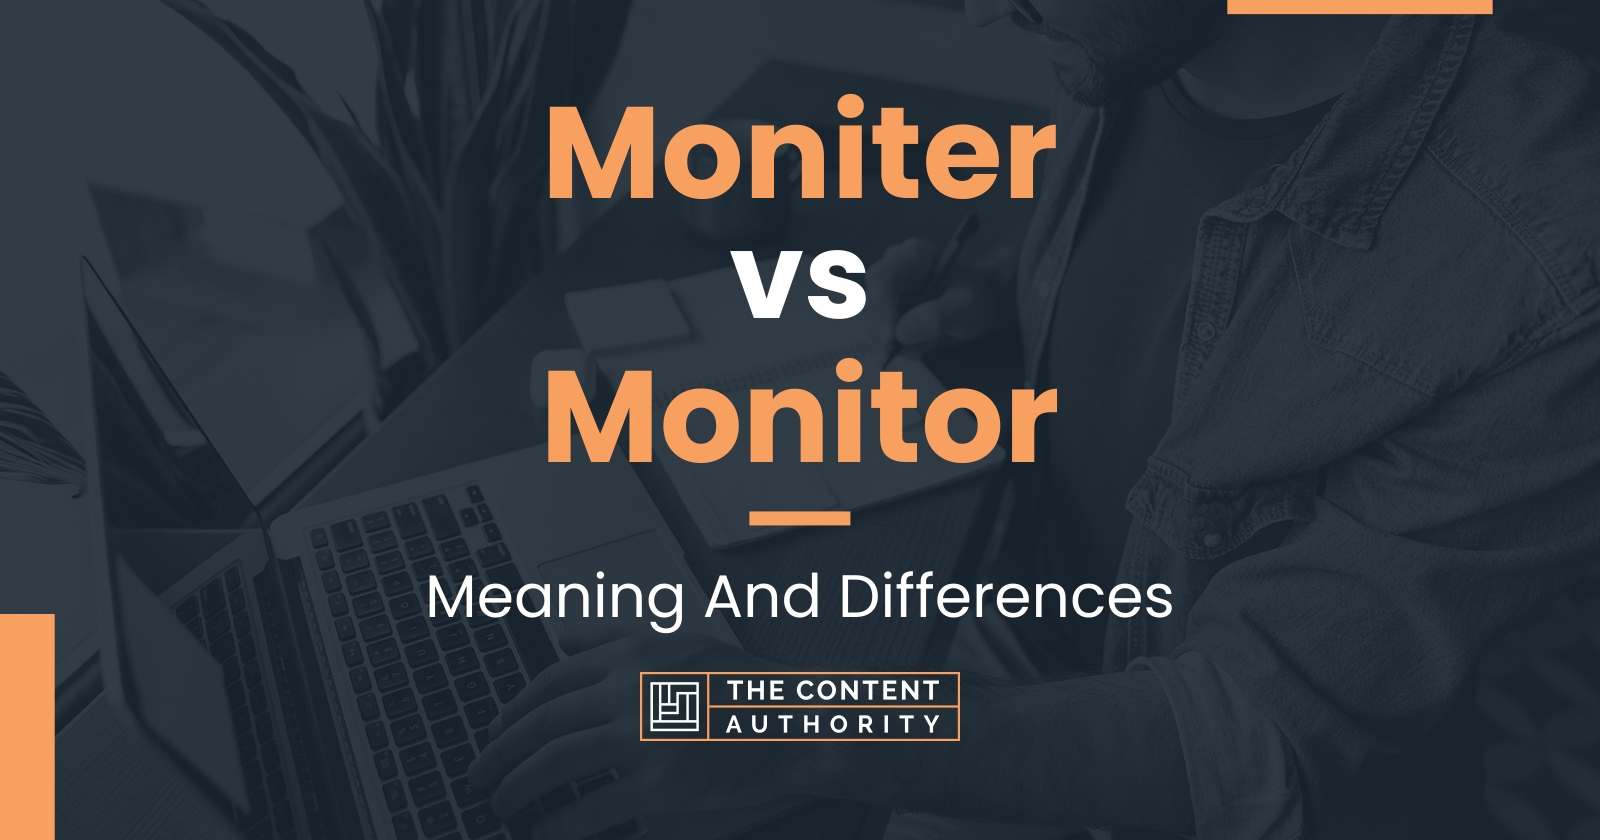 Moniter vs Monitor: Meaning And Differences